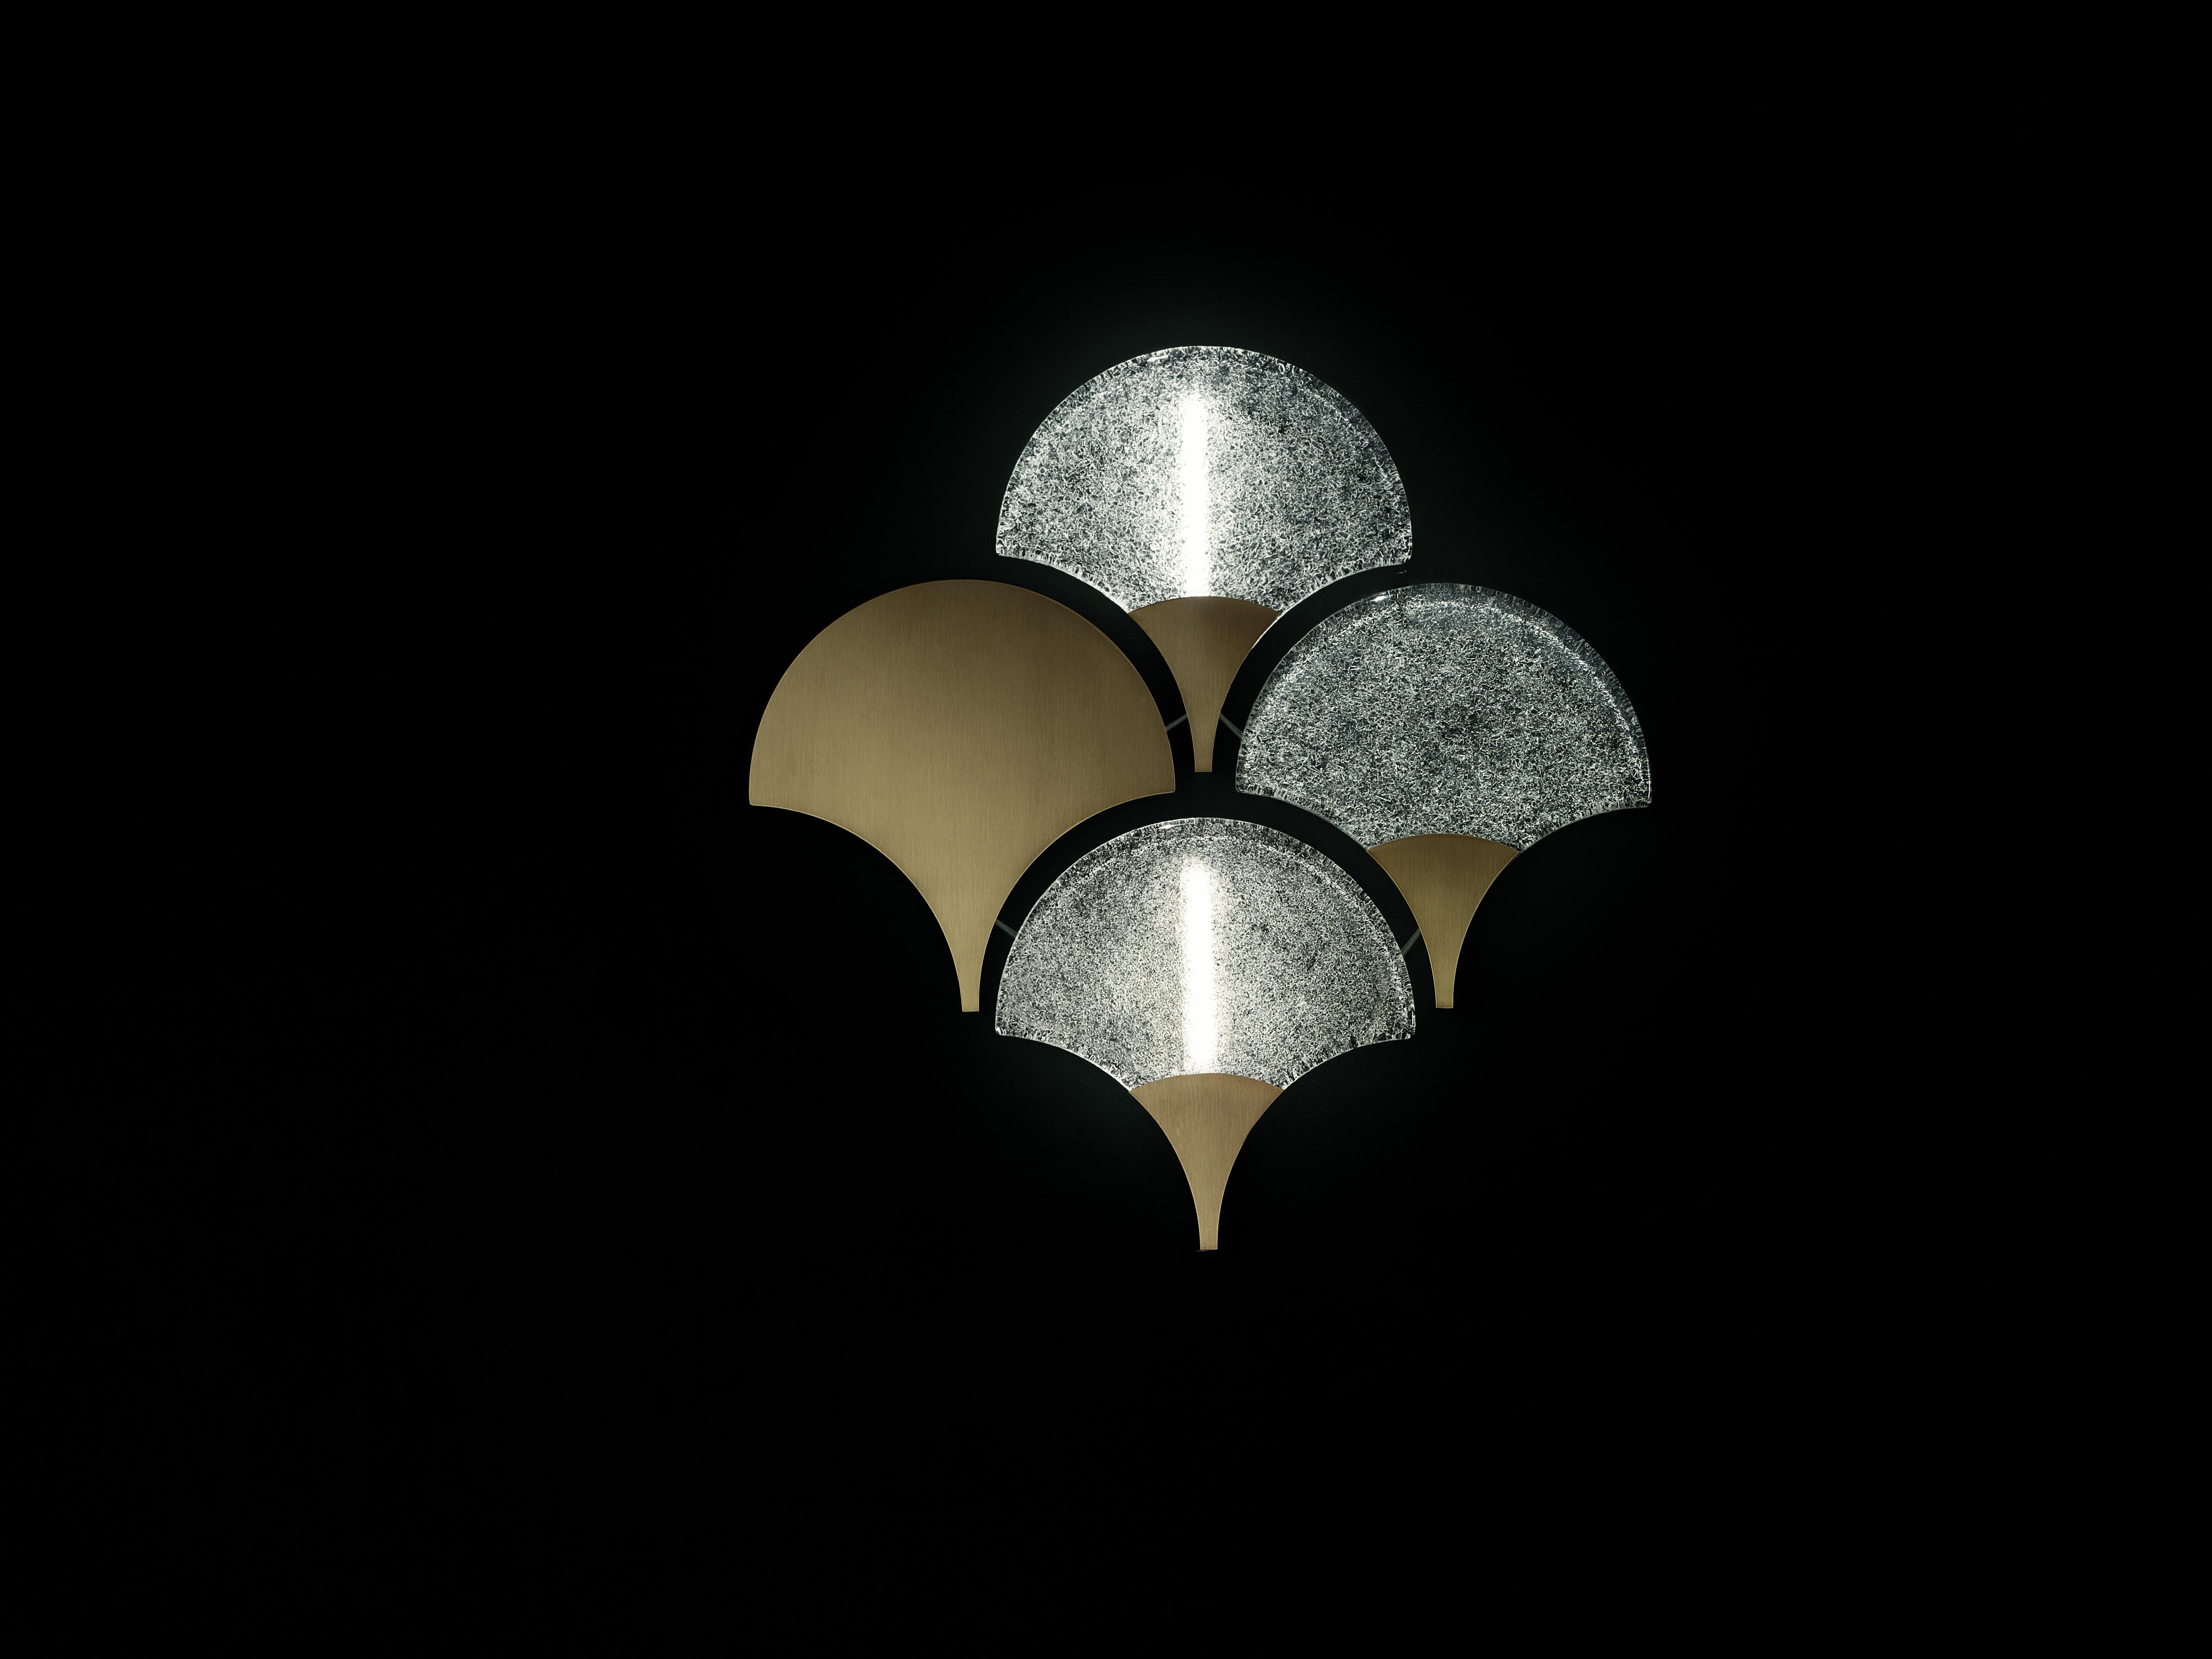 With its modern form rendered more traditional using the Rugiada technique, patented in the 20th century by Barovier&Toso, Tuileries is an infinite wall lamp: its perfect symmetry enables the creation of endless compositions of illuminated and non-